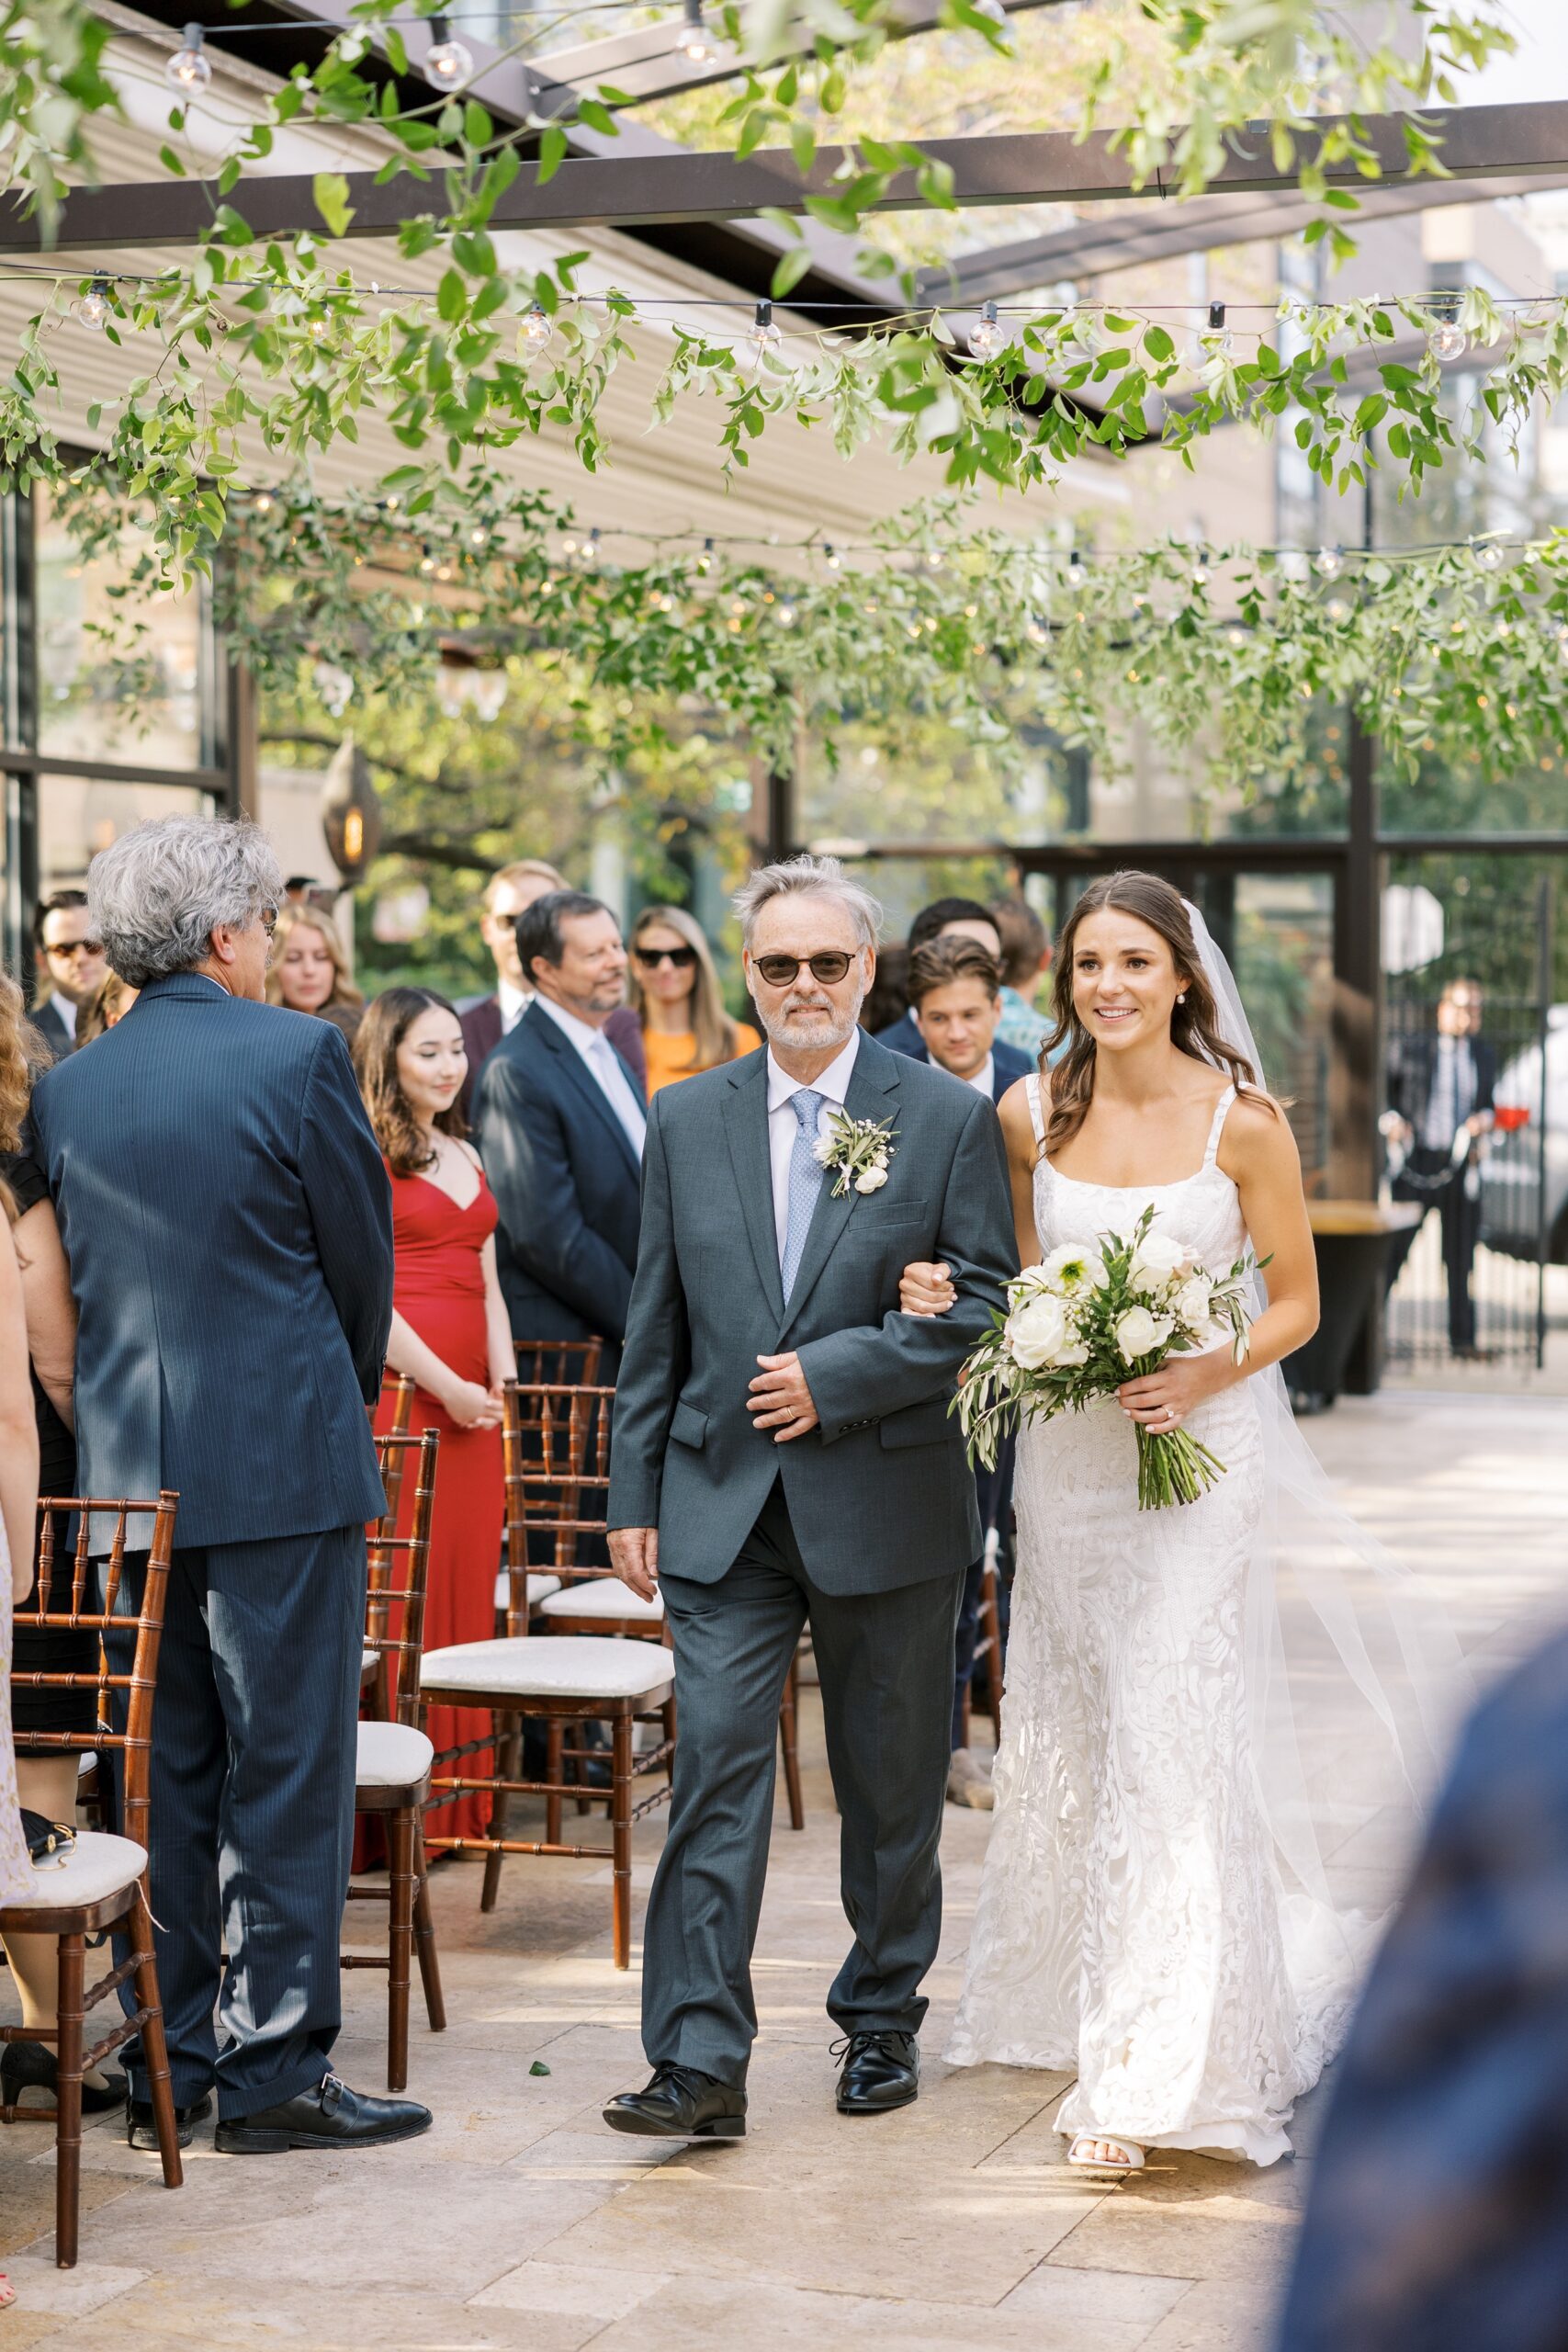 bride and father of the bride walking down the aisle at galleria Marchetti wedding